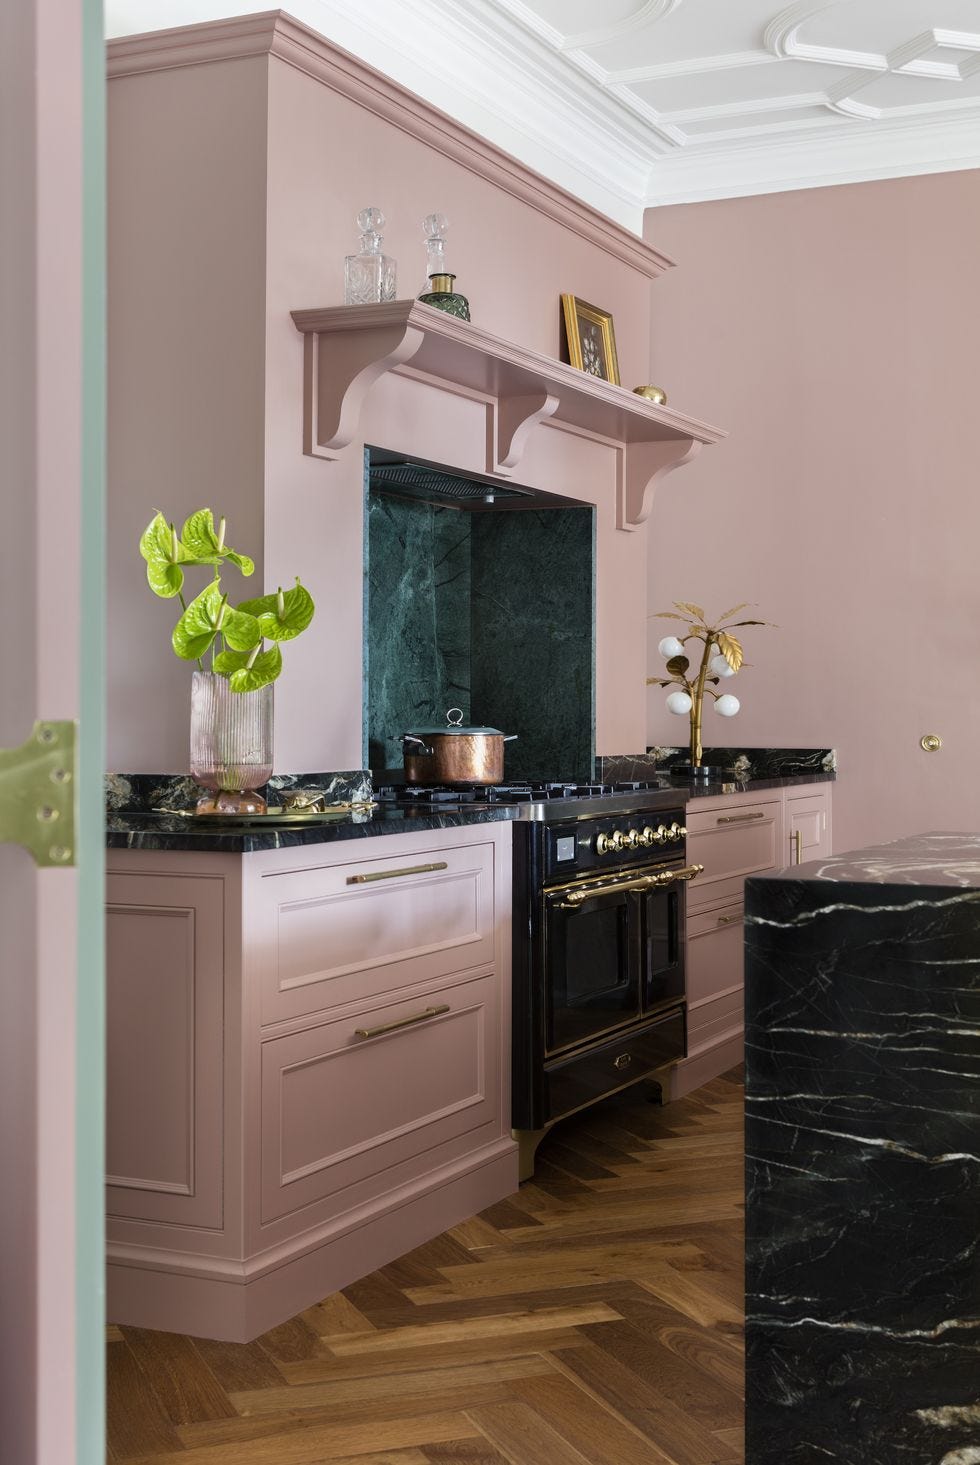 Kitchen color ideas pink and black